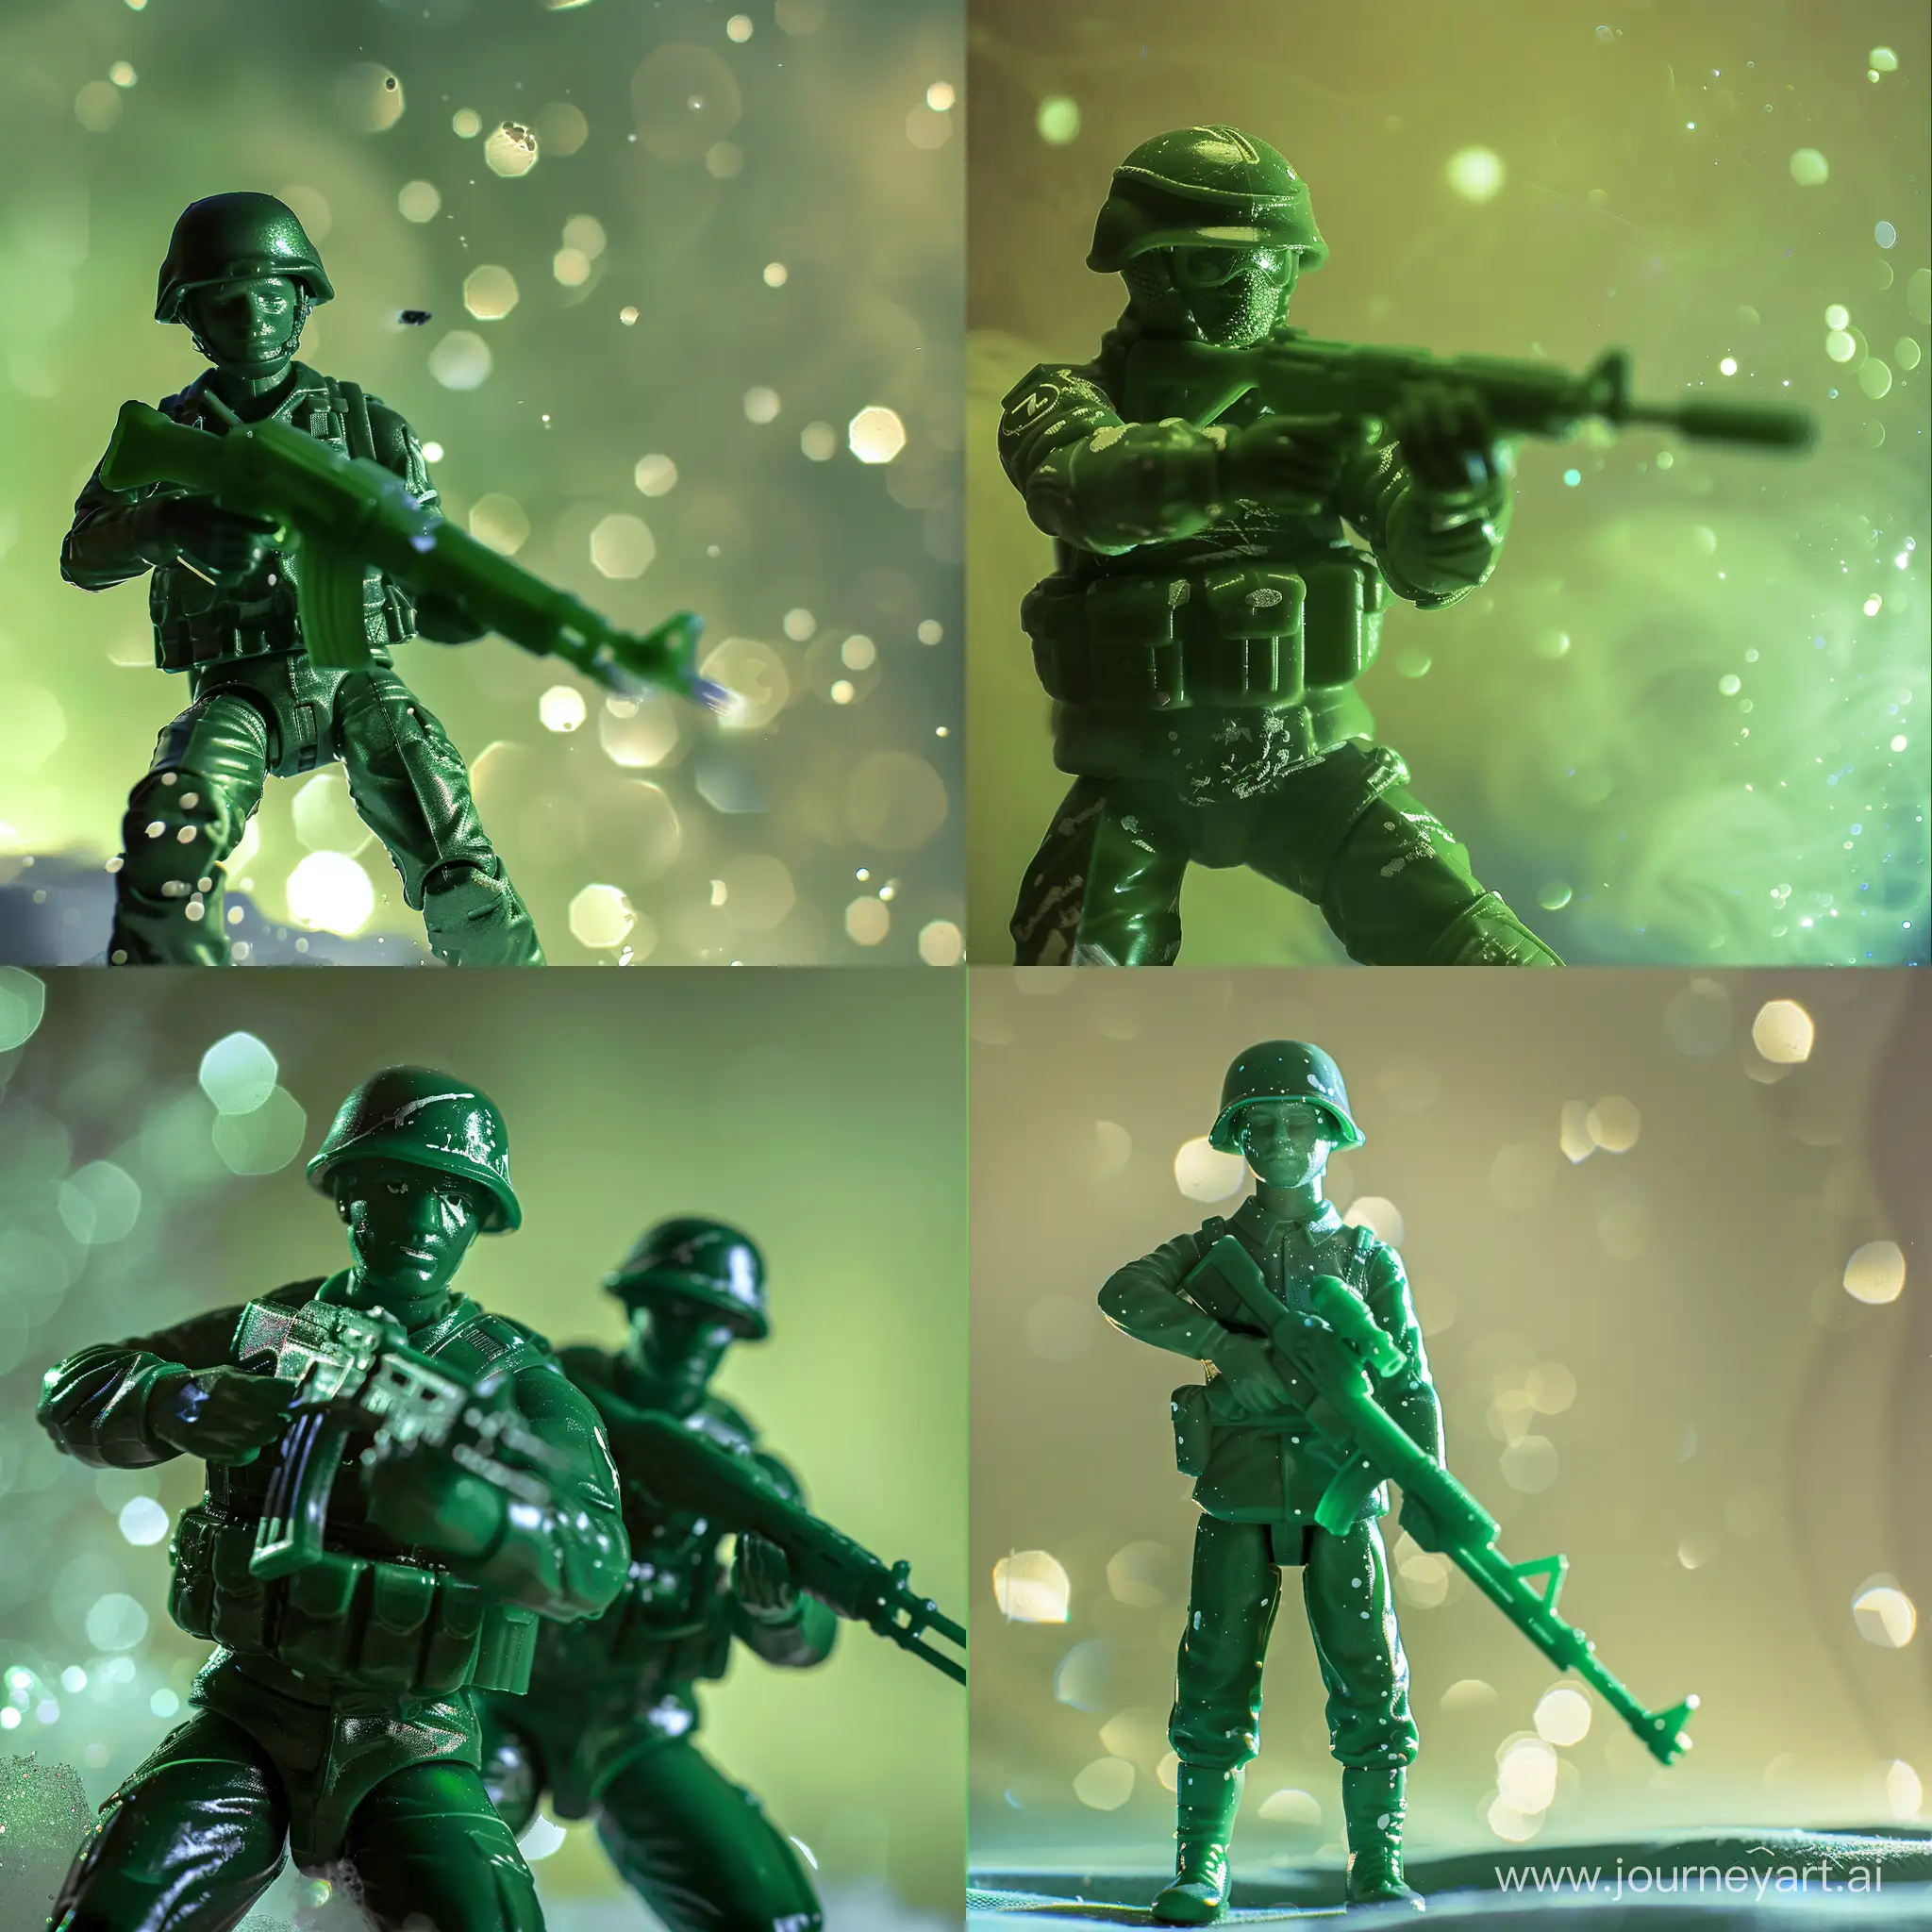 Detailed-Green-Plastic-Soldiers-with-Weapons-on-Vibrant-Green-Background